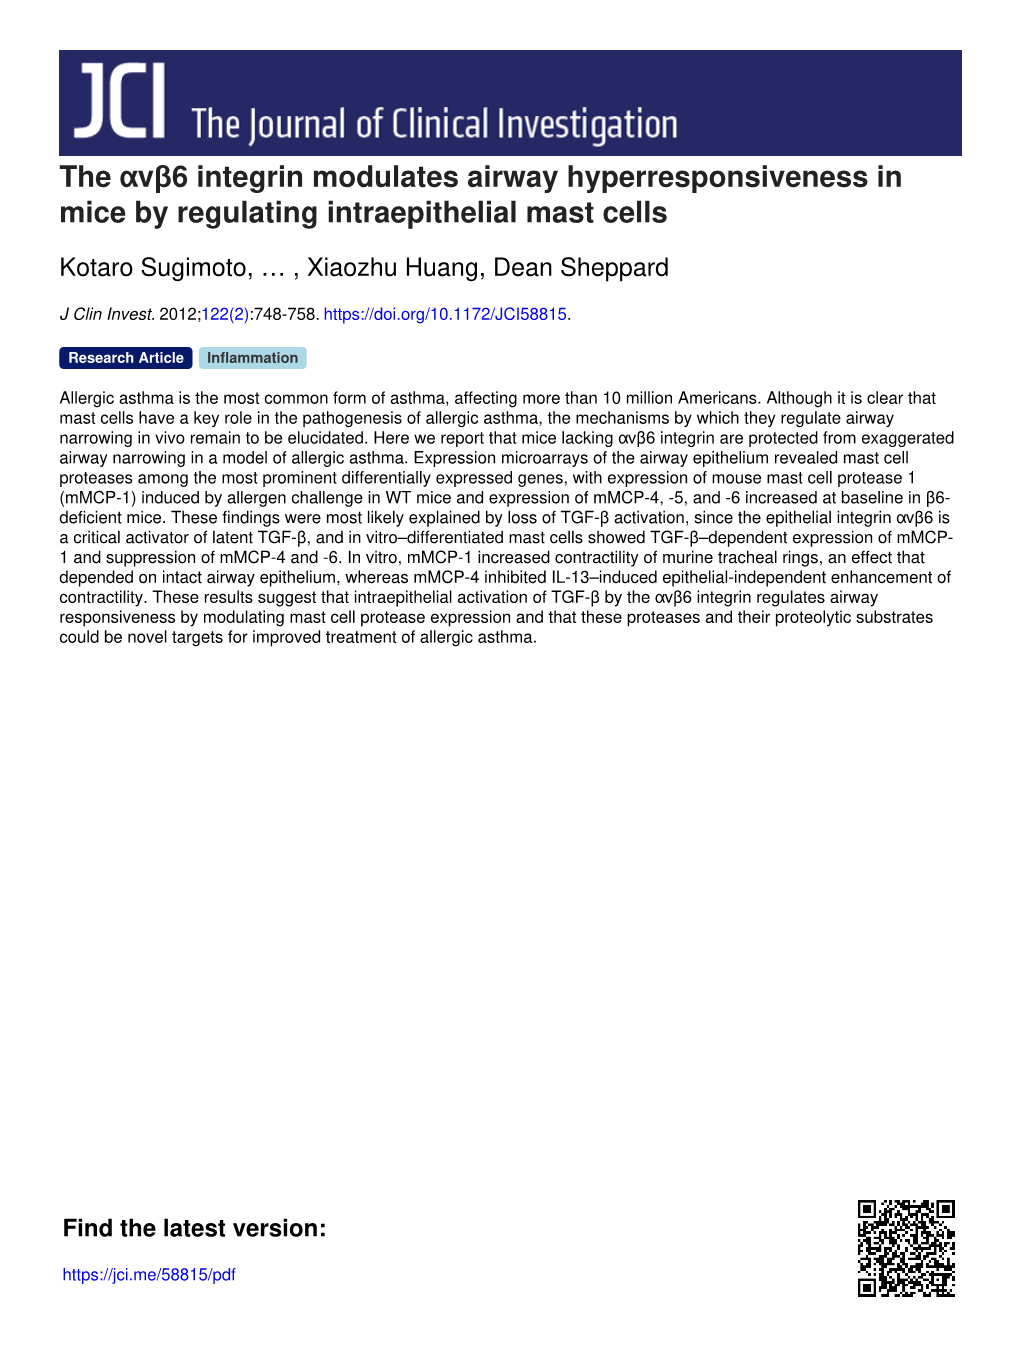 The Αvβ6 Integrin Modulates Airway Hyperresponsiveness in Mice by Regulating Intraepithelial Mast Cells